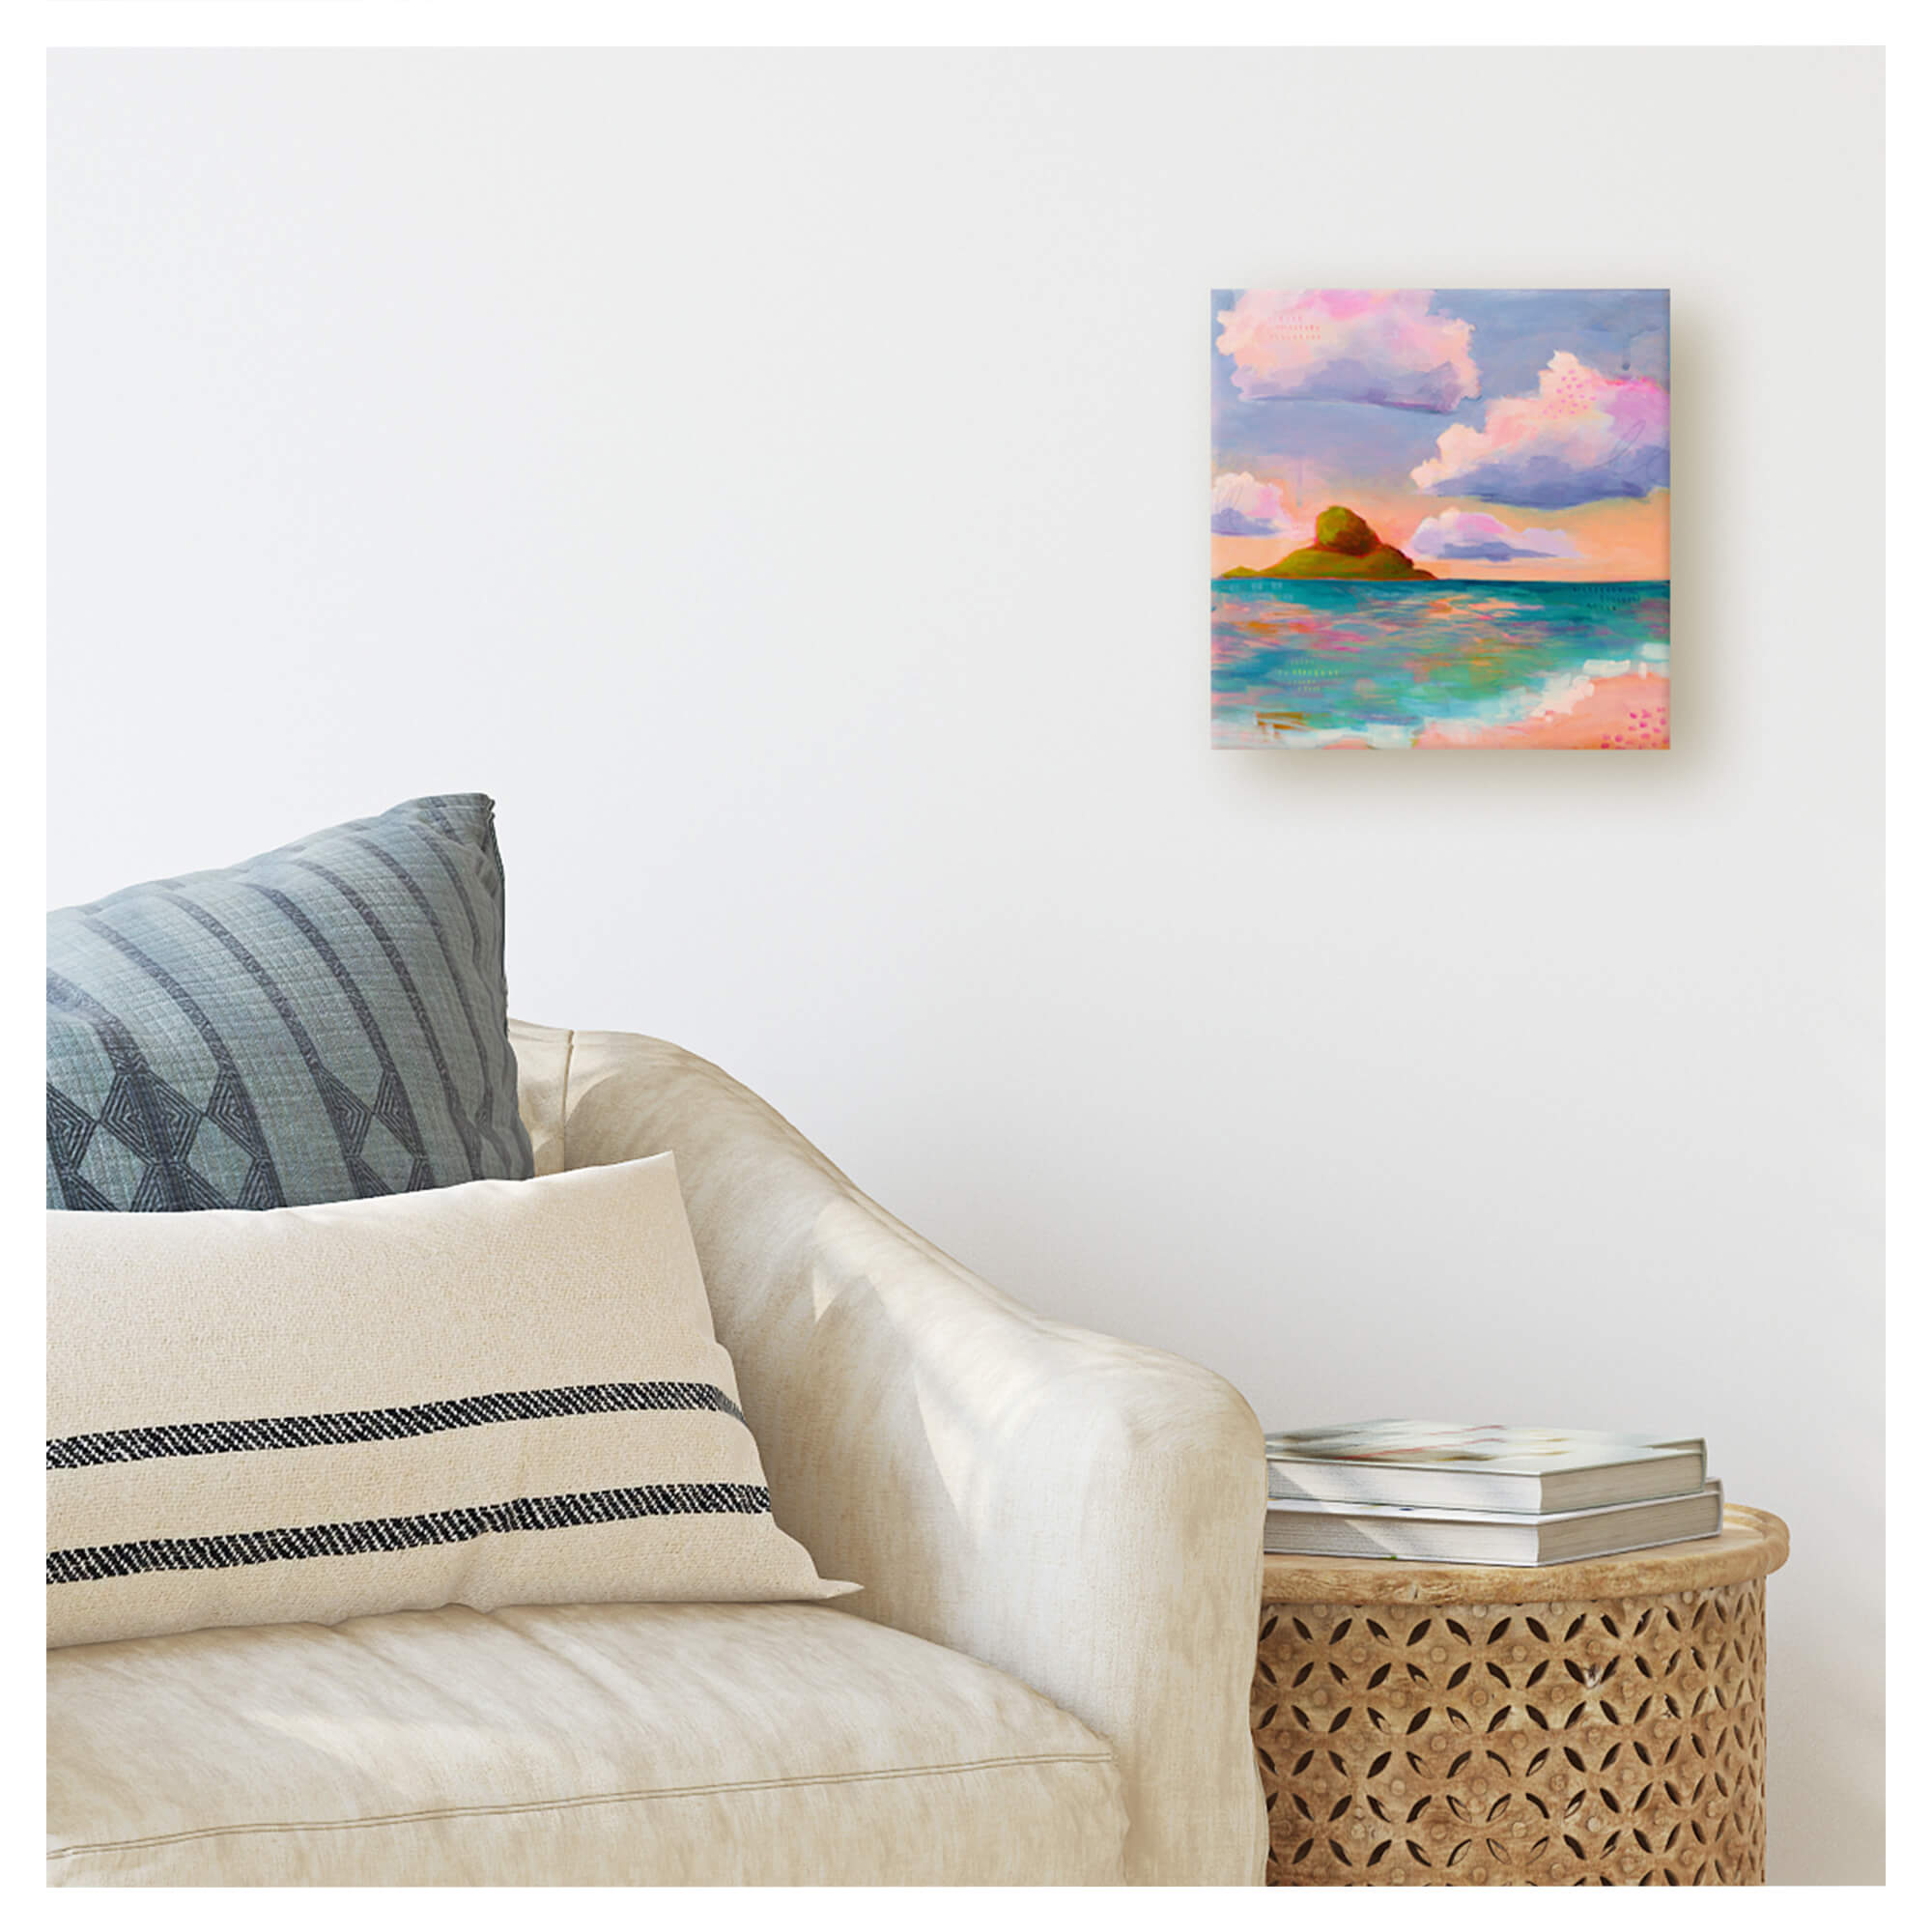 A painting on canvas depicting a multi colored seascape and a distant island by Hawaii artist Lindsay Wilkins